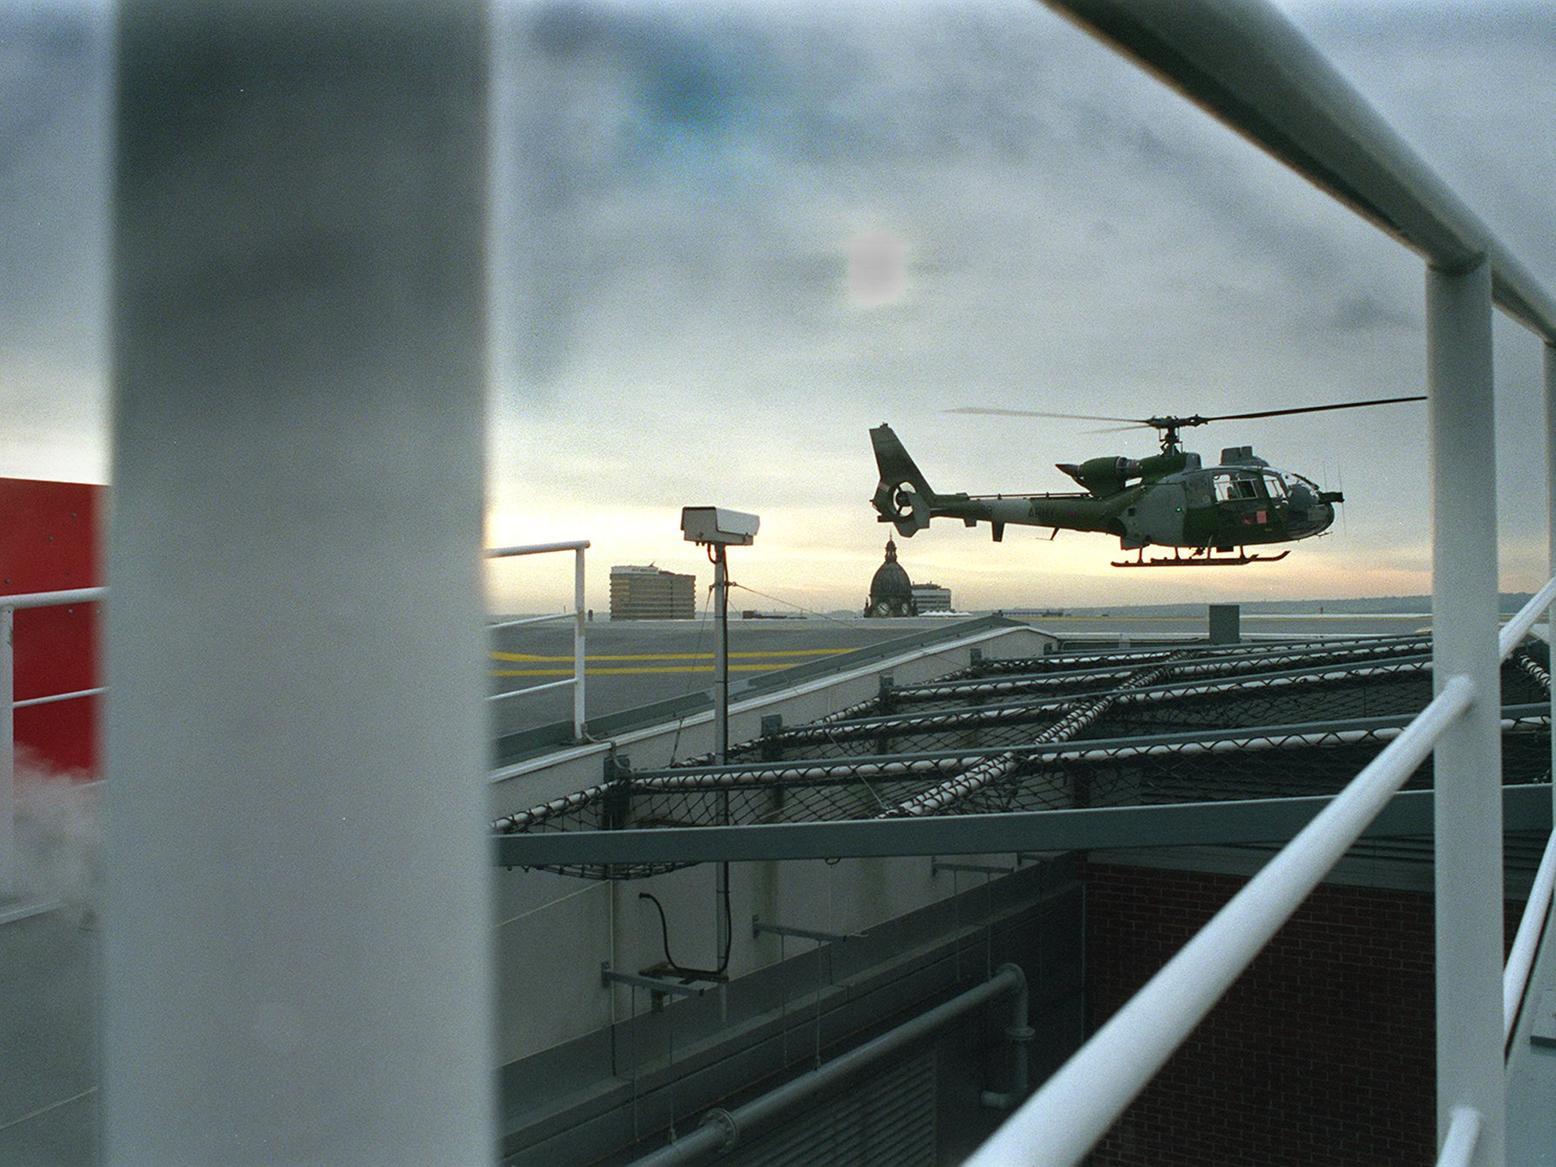 An Aerospatiale Gazelle helicopter from the 656 Squadron R.A.F. Dishforth lands on the new helipad on the roof of the new Jubilee Building at LGI during a trial flight.